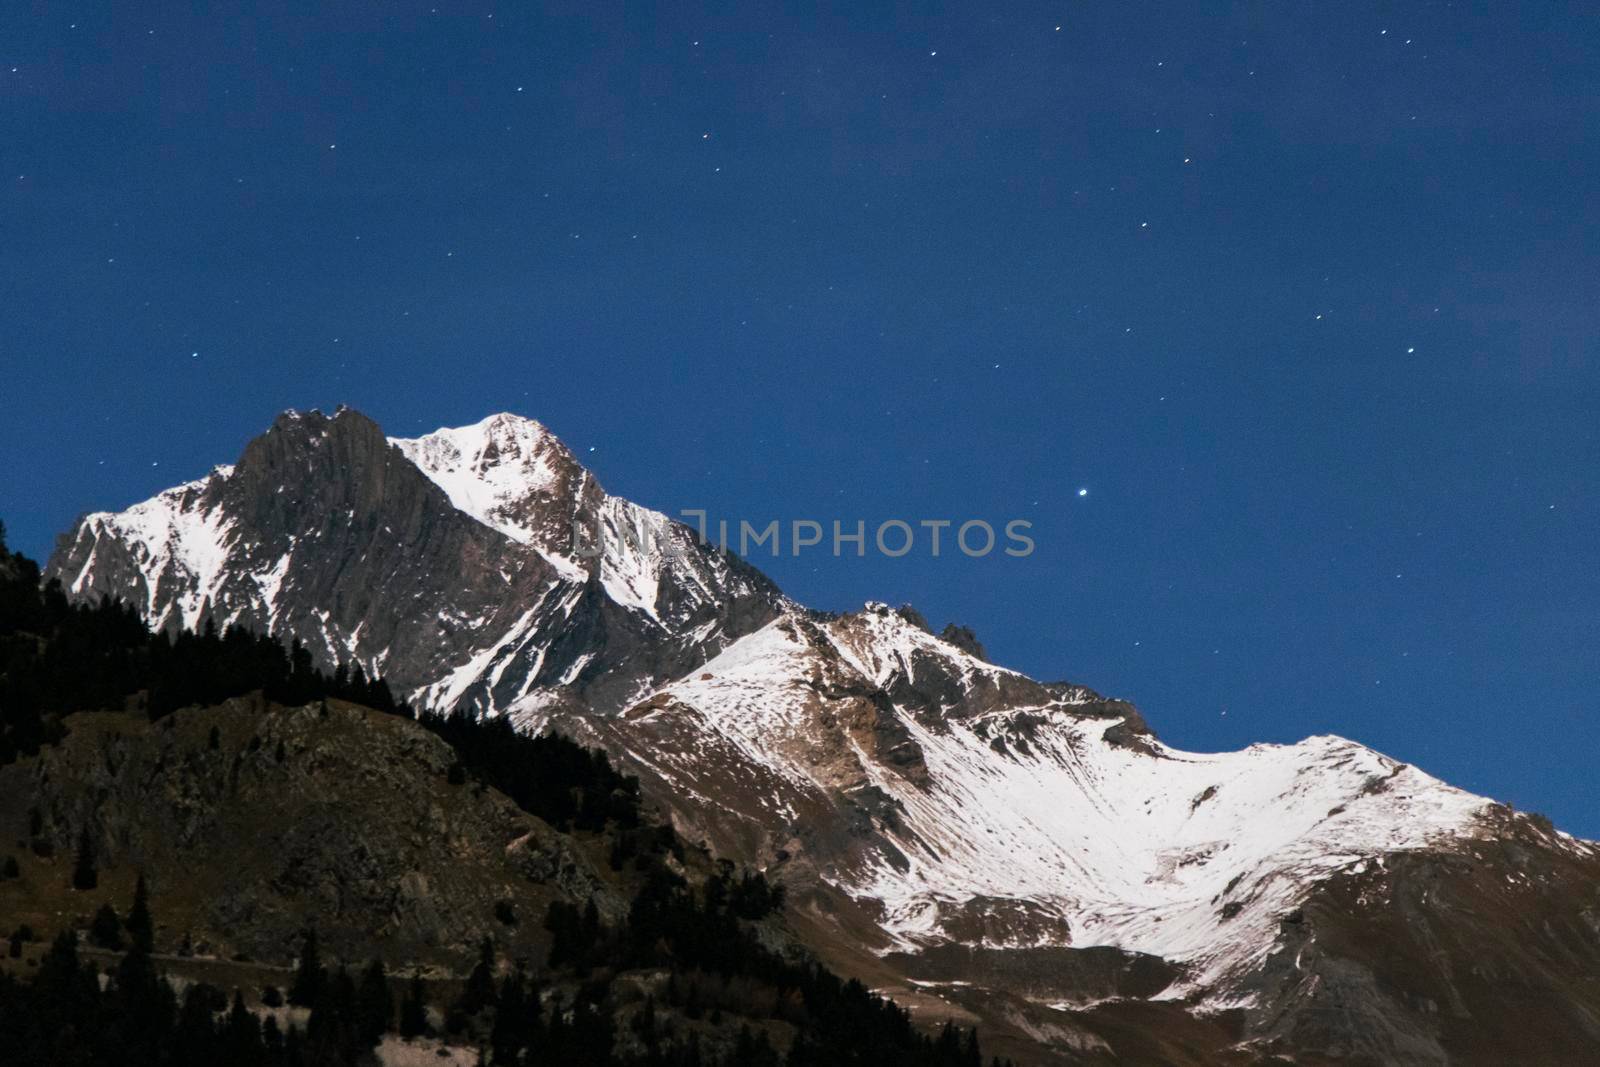 A rocky mountain top with a dusting of snow is illuminated by a full moon out of shot, as stars twinkle above in the midnight blue sky